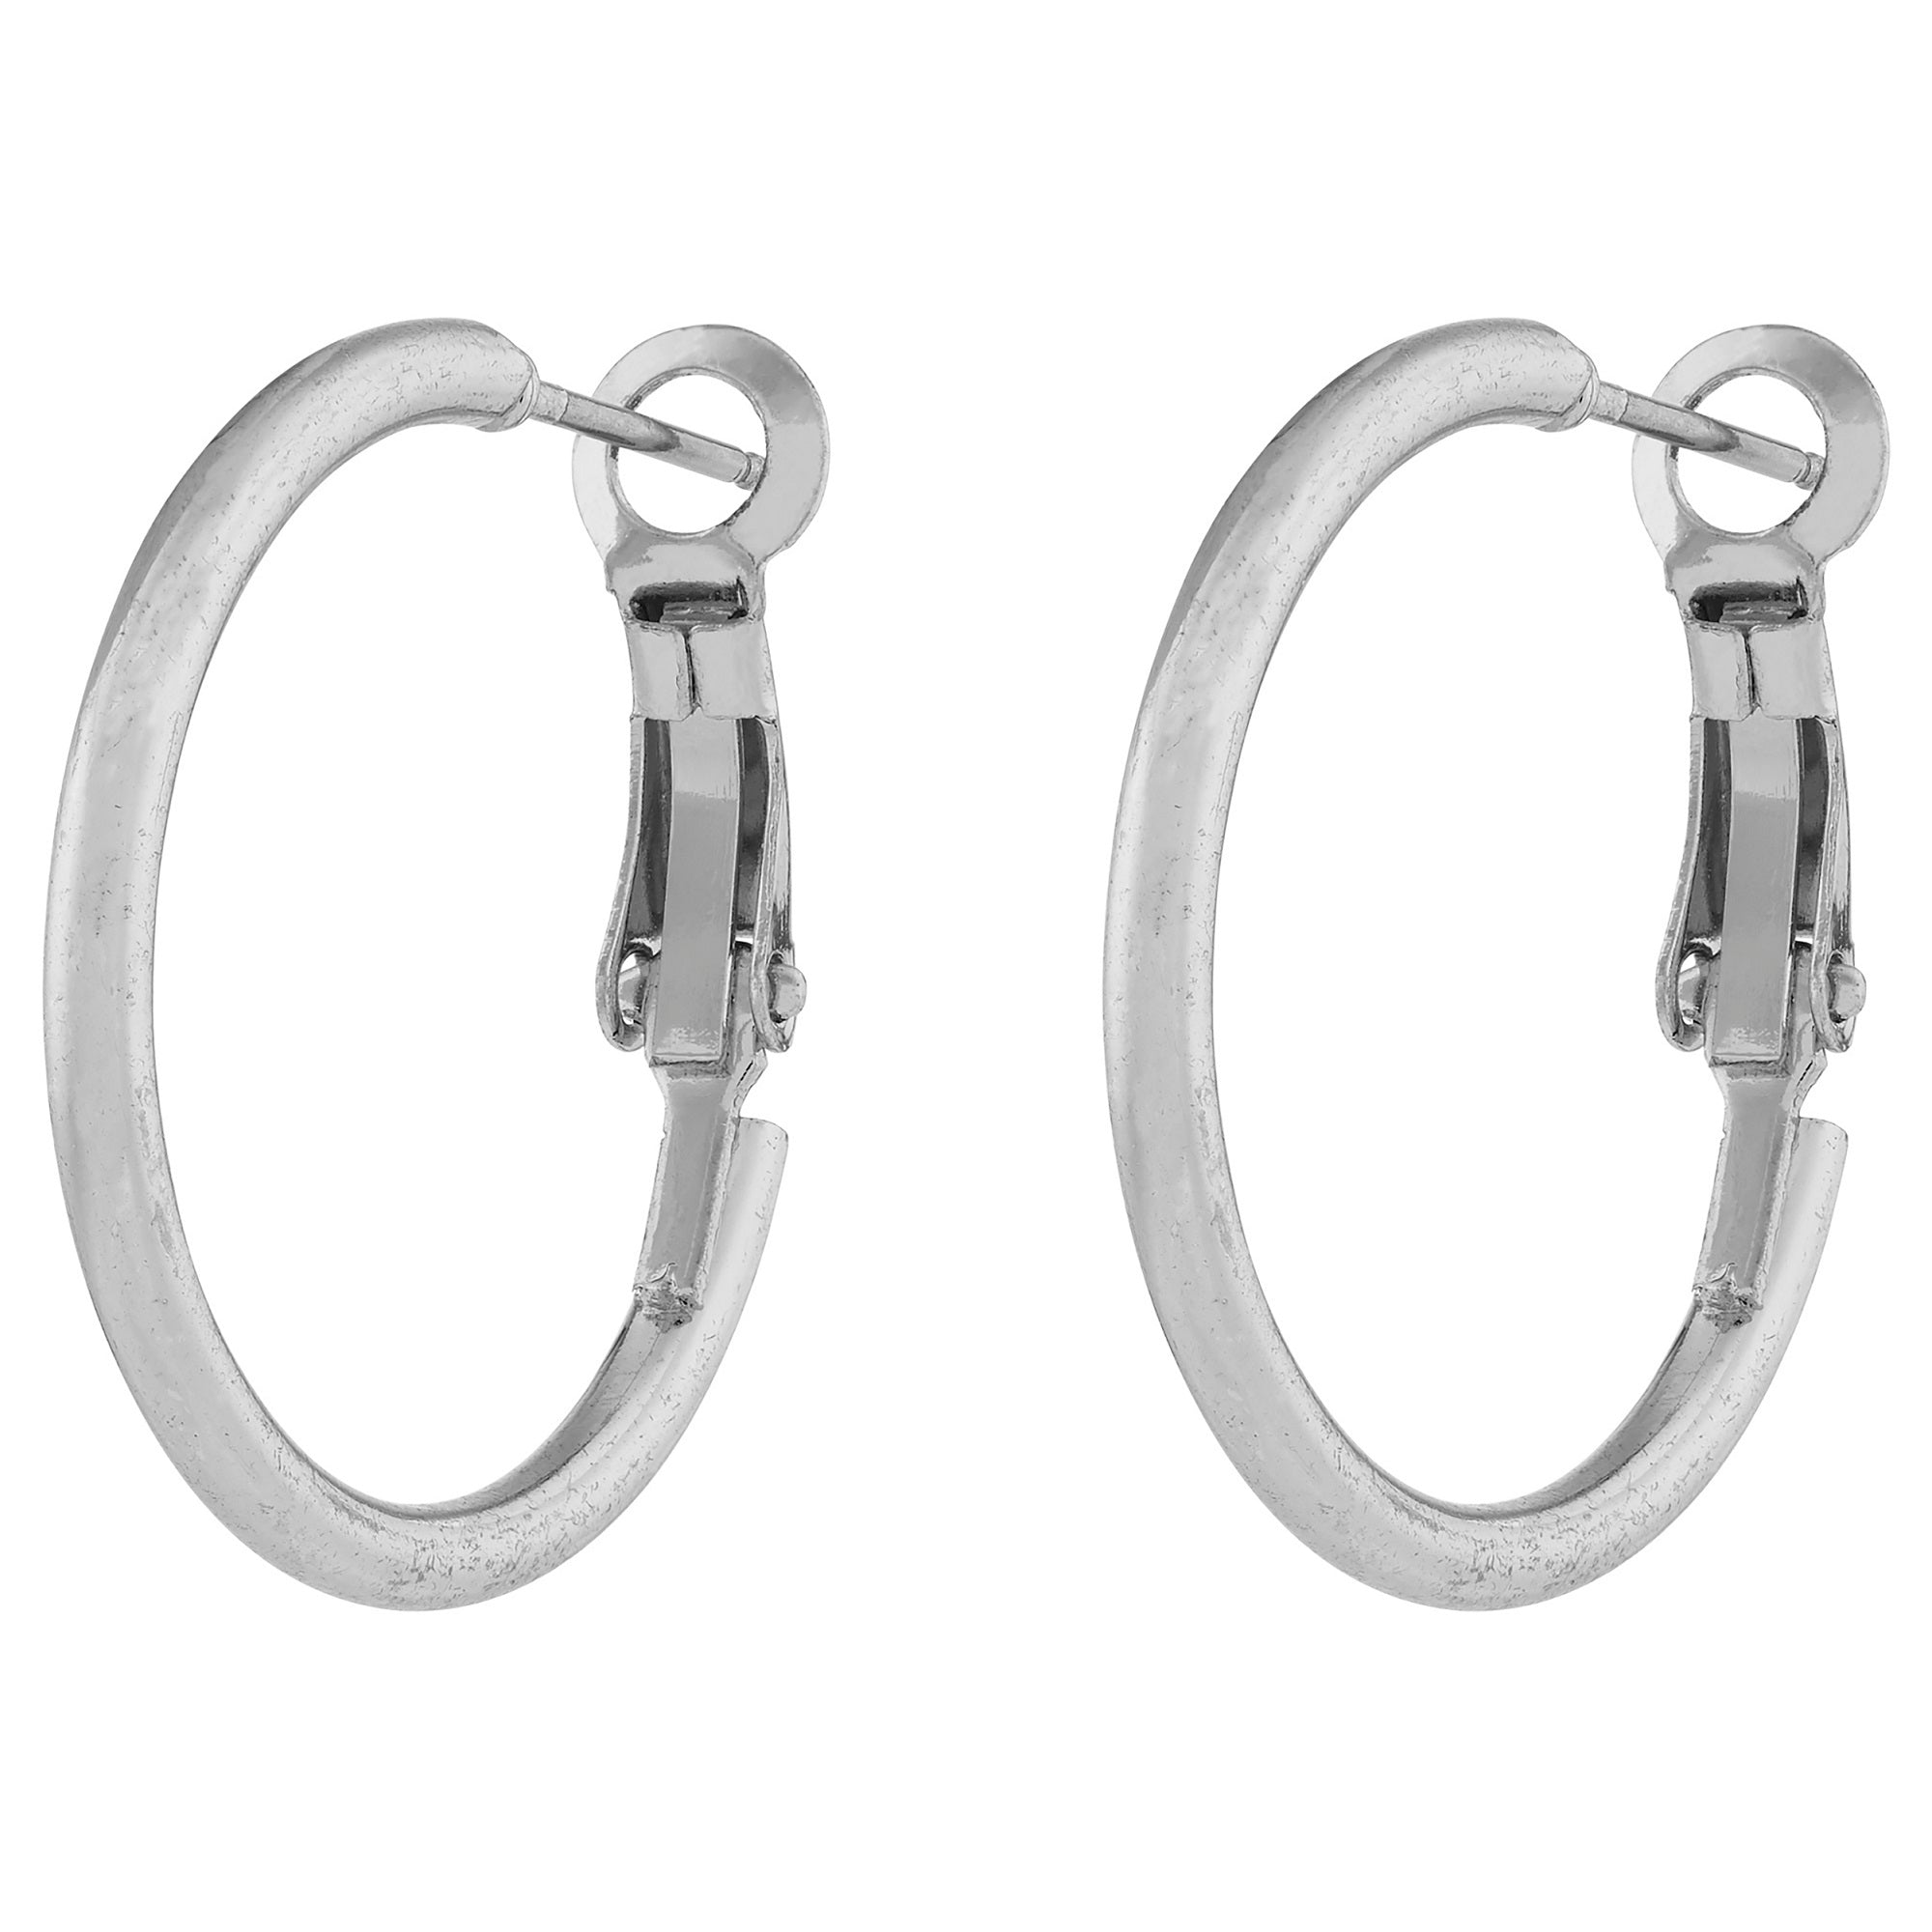 ChicSilver 925 Sterling Silver Hoop Earrings for Women 20mm Small Silver  Hoops Hypoallergenic Jewelry Gift for Birthday Christmas - Walmart.com